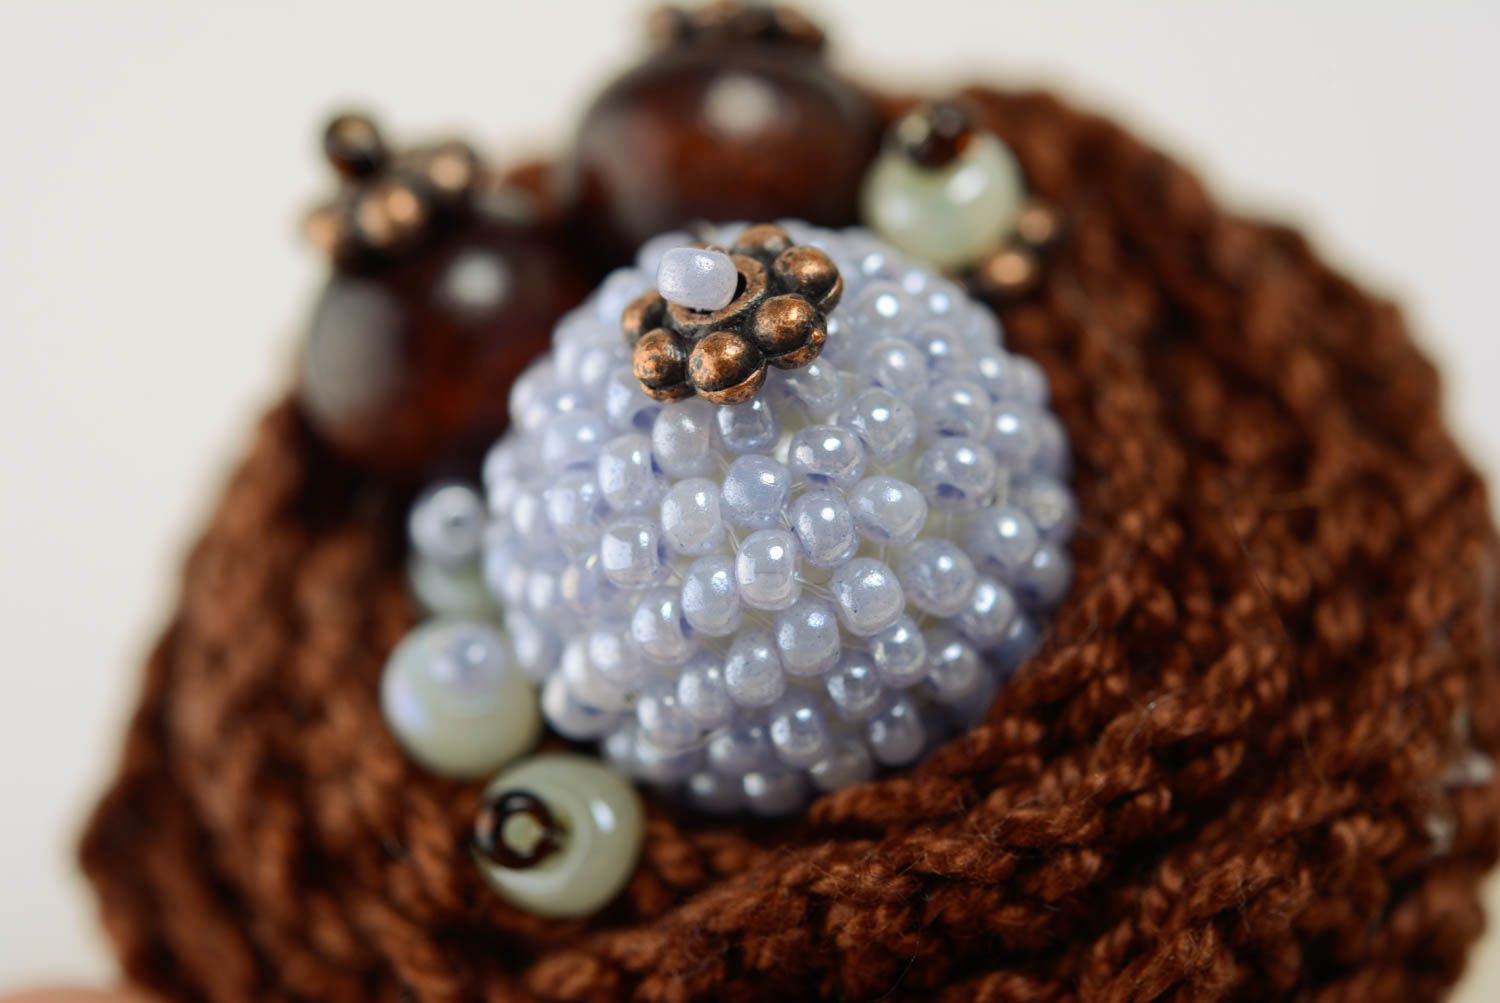 Crocheted flower brooch with brown beads and wood beads stylish accessory photo 2